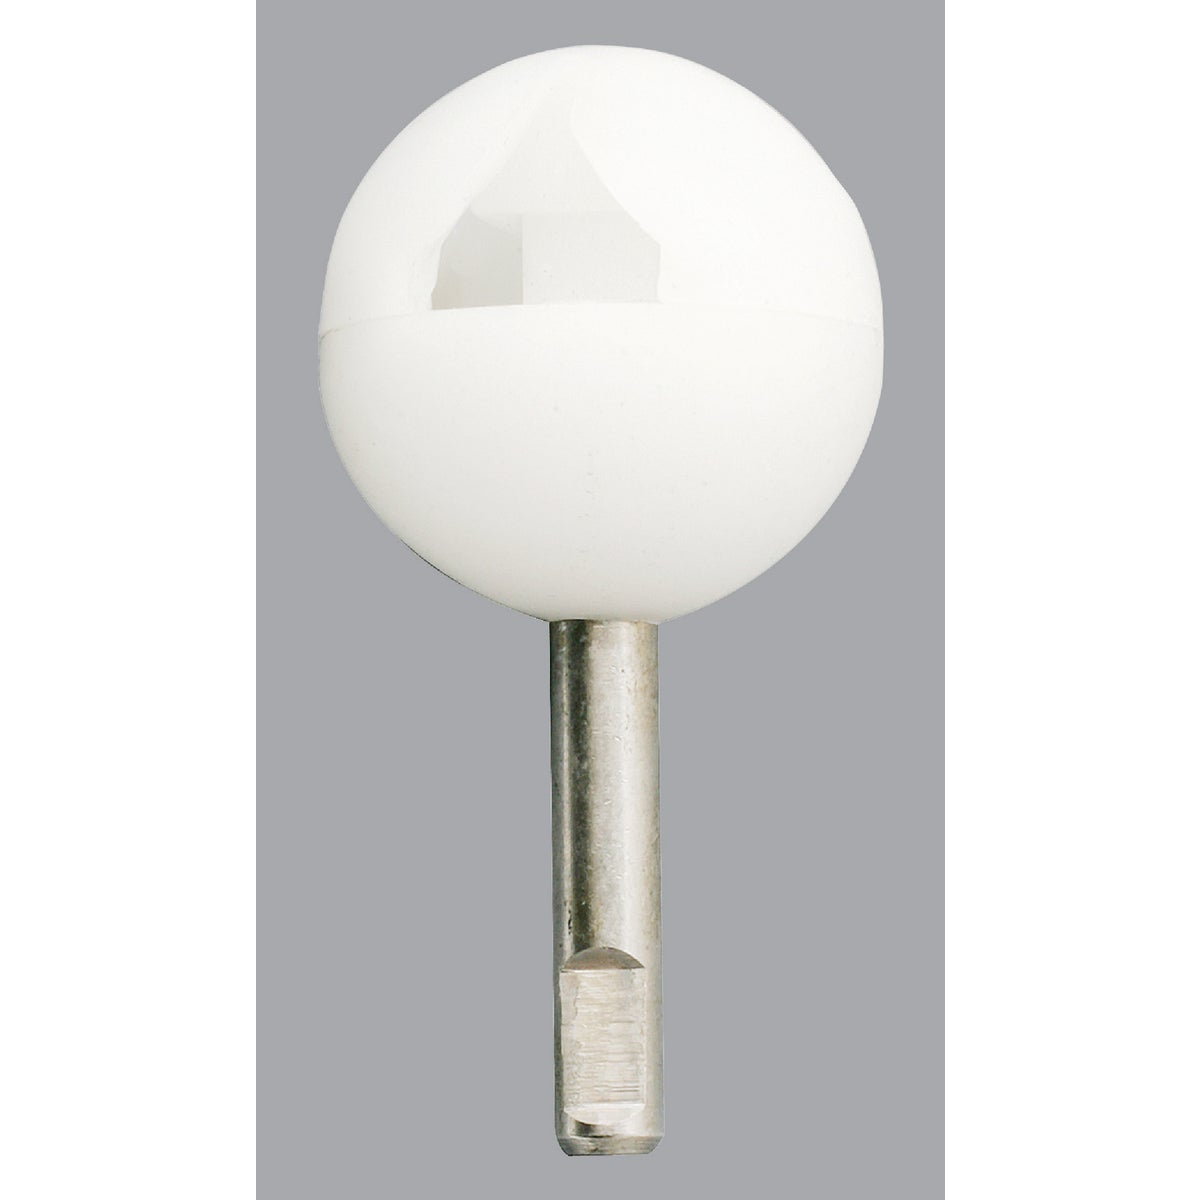 LEVER STYLE FAUCET BALL